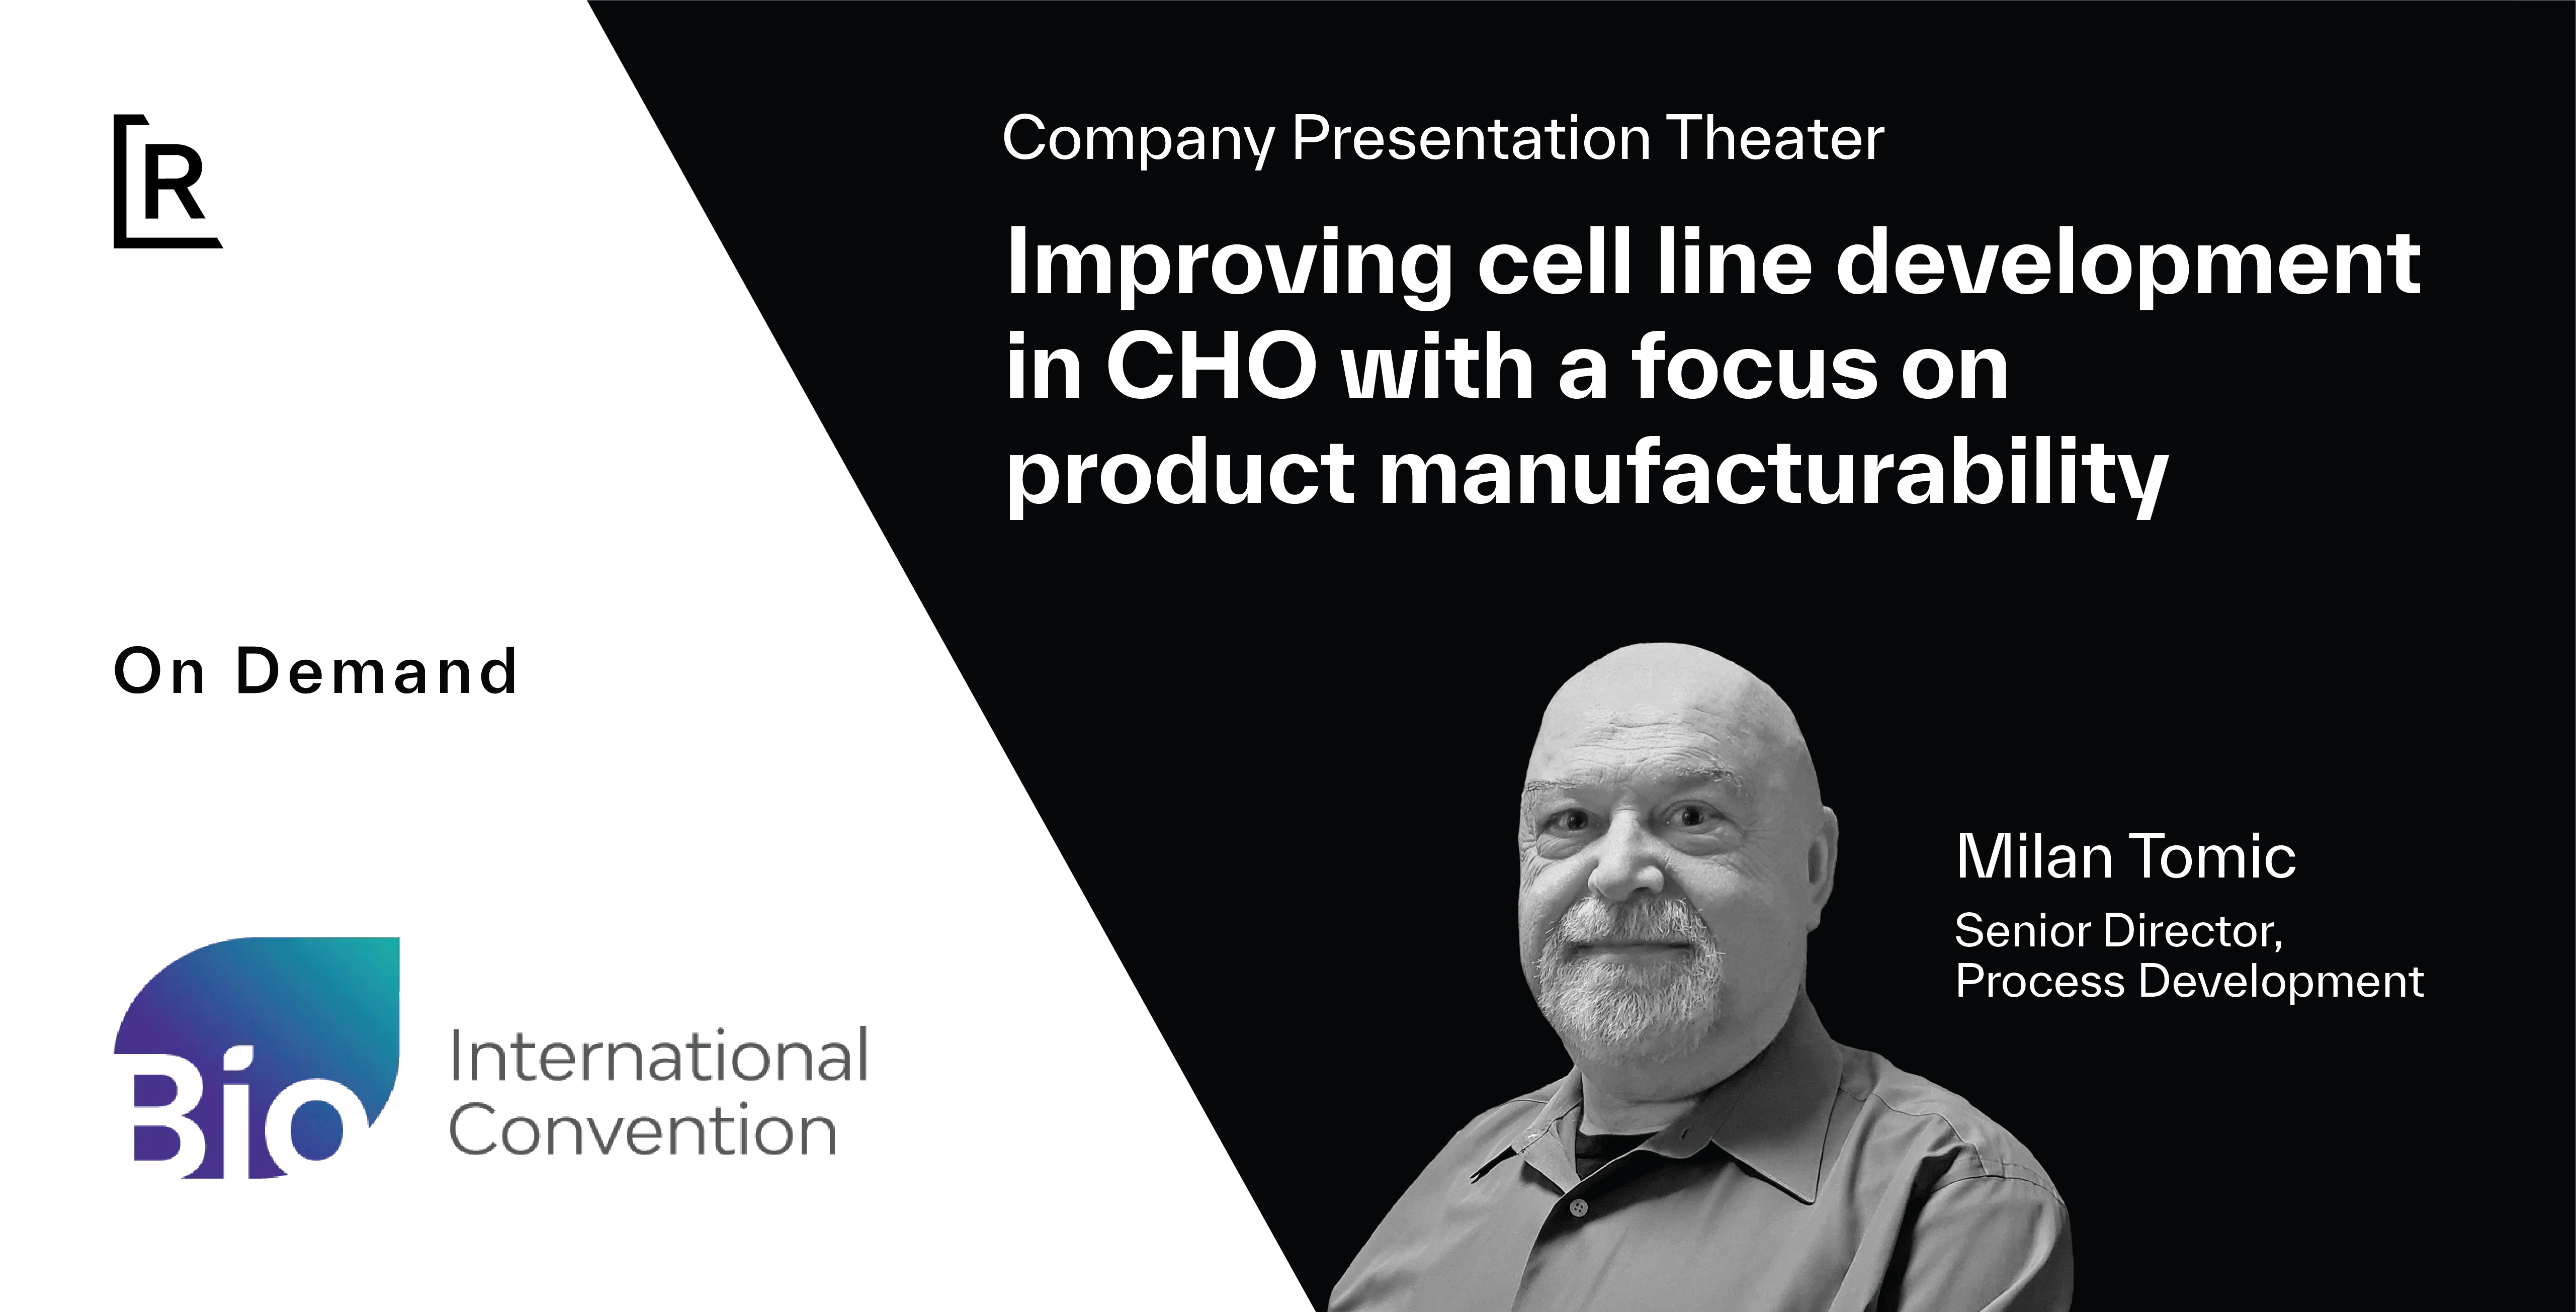 On-Demand Presentation: Improving cell line development in CHO with a focus on product manufacturability - featured image